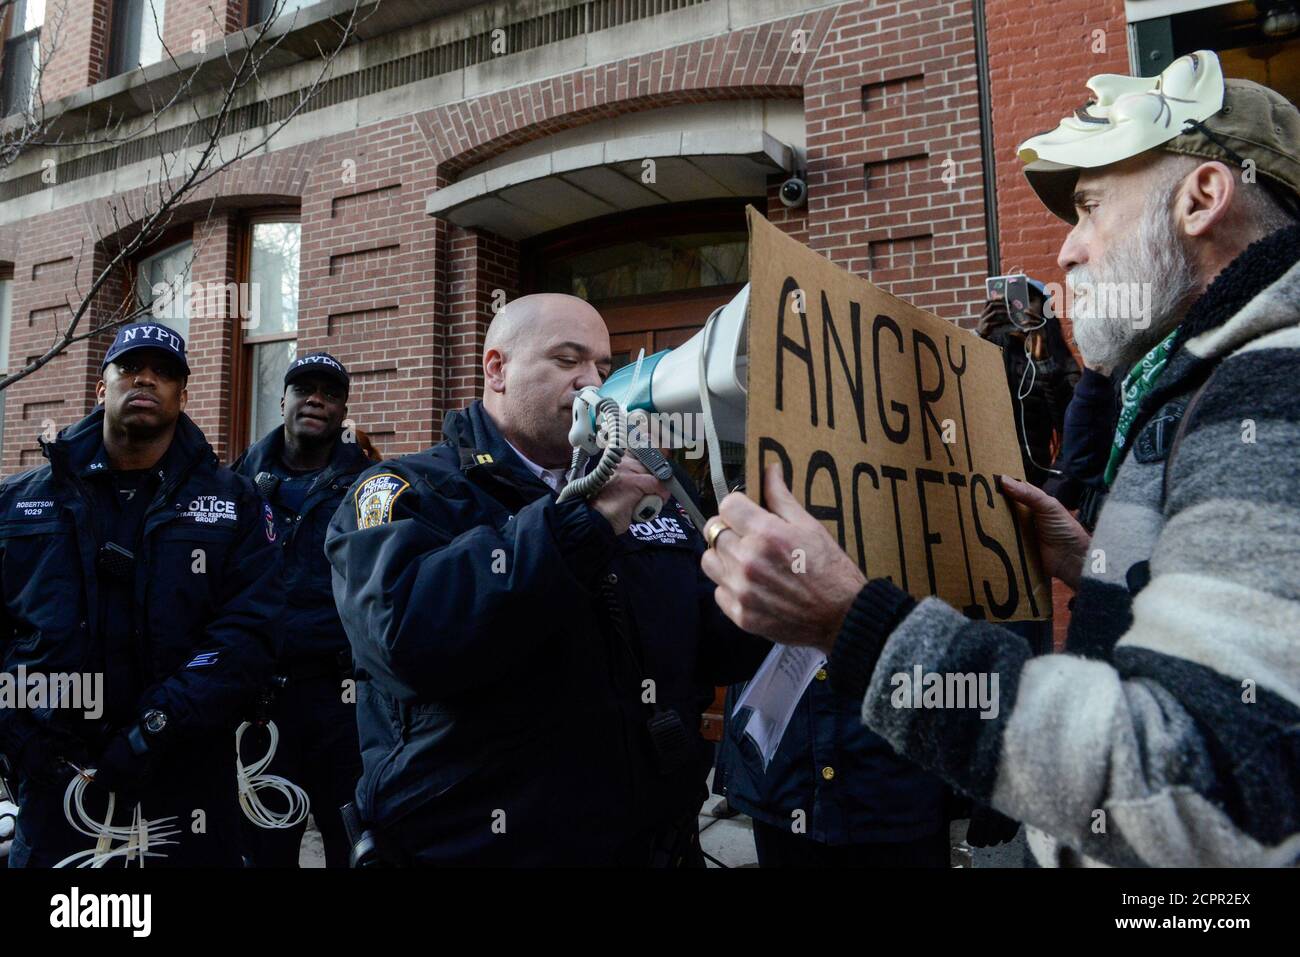 People participate in a protest against U.S. President Donald Trump's immigration policy and the recent Immigration and Customs Enforcement (ICE) raids in New York City, U.S. February 11, 2017. REUTERS/Stephanie Keith Stock Photo